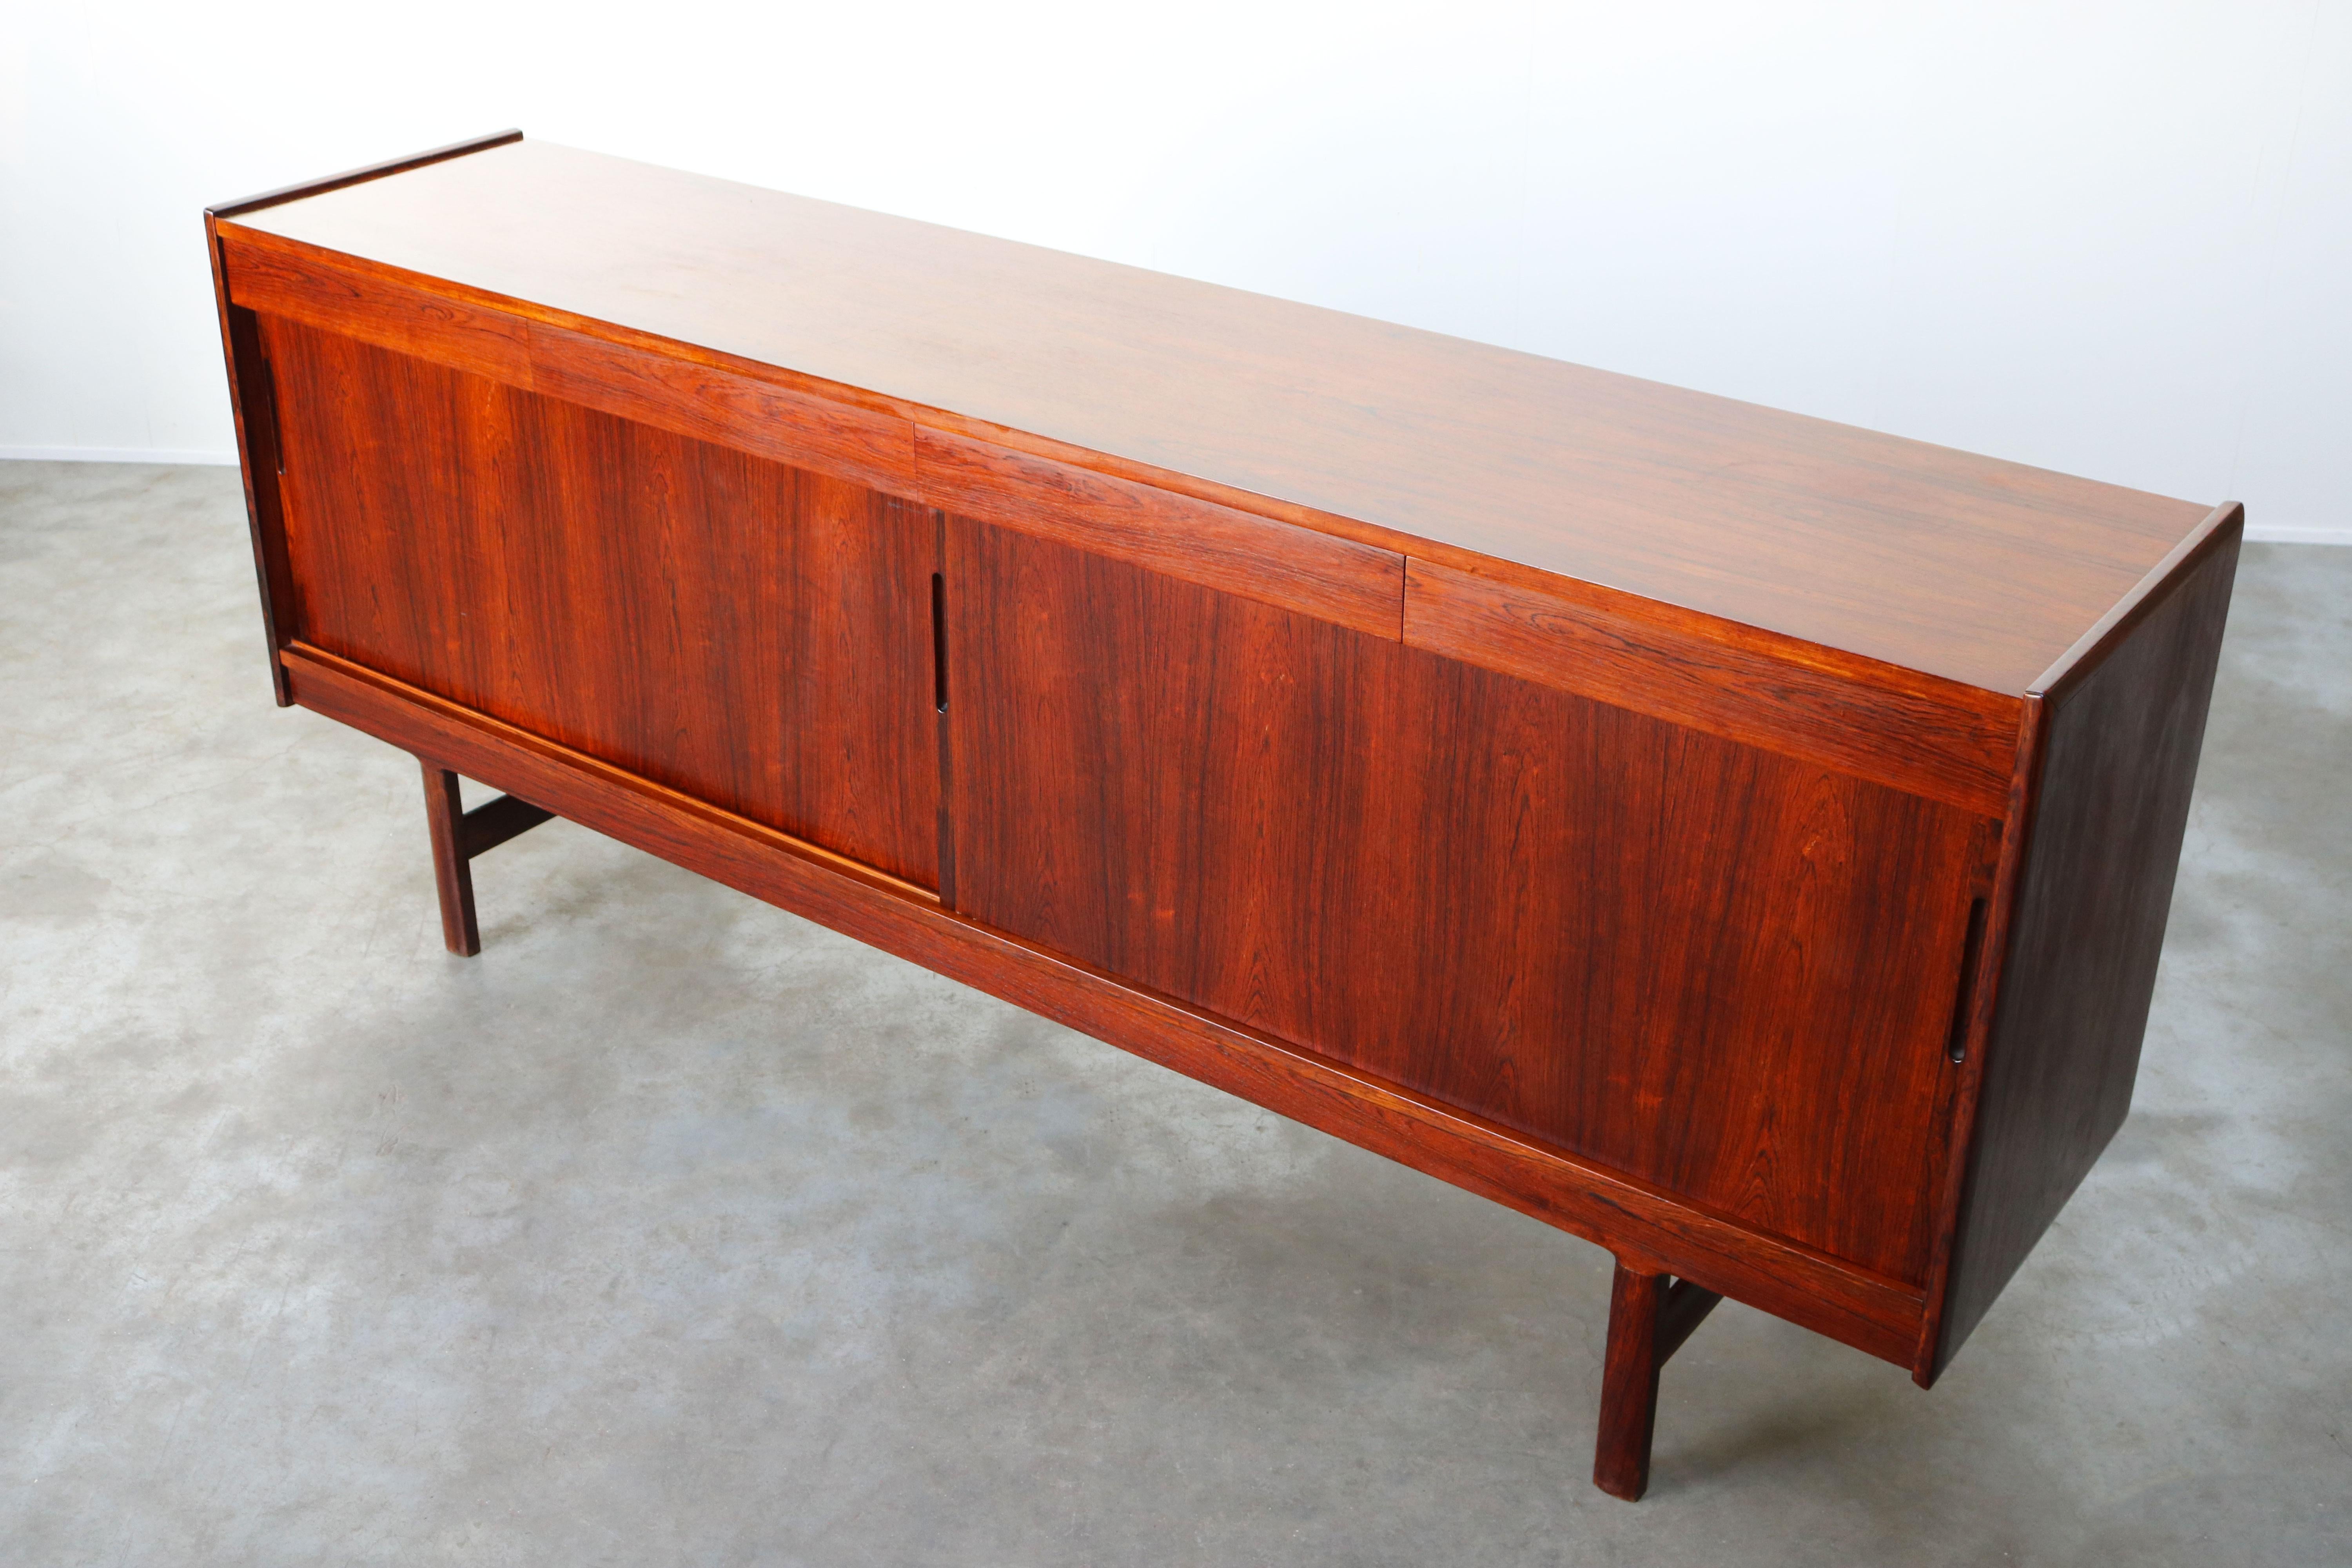 Wonderful design sideboard / credenza from Norway produced and designed by the Westnofa Furniture Company in the 1950s. The sideboard has a wonderful Minimalist modern design with 4 hidden drawers and 2 large sliding doors. The sideboard is made